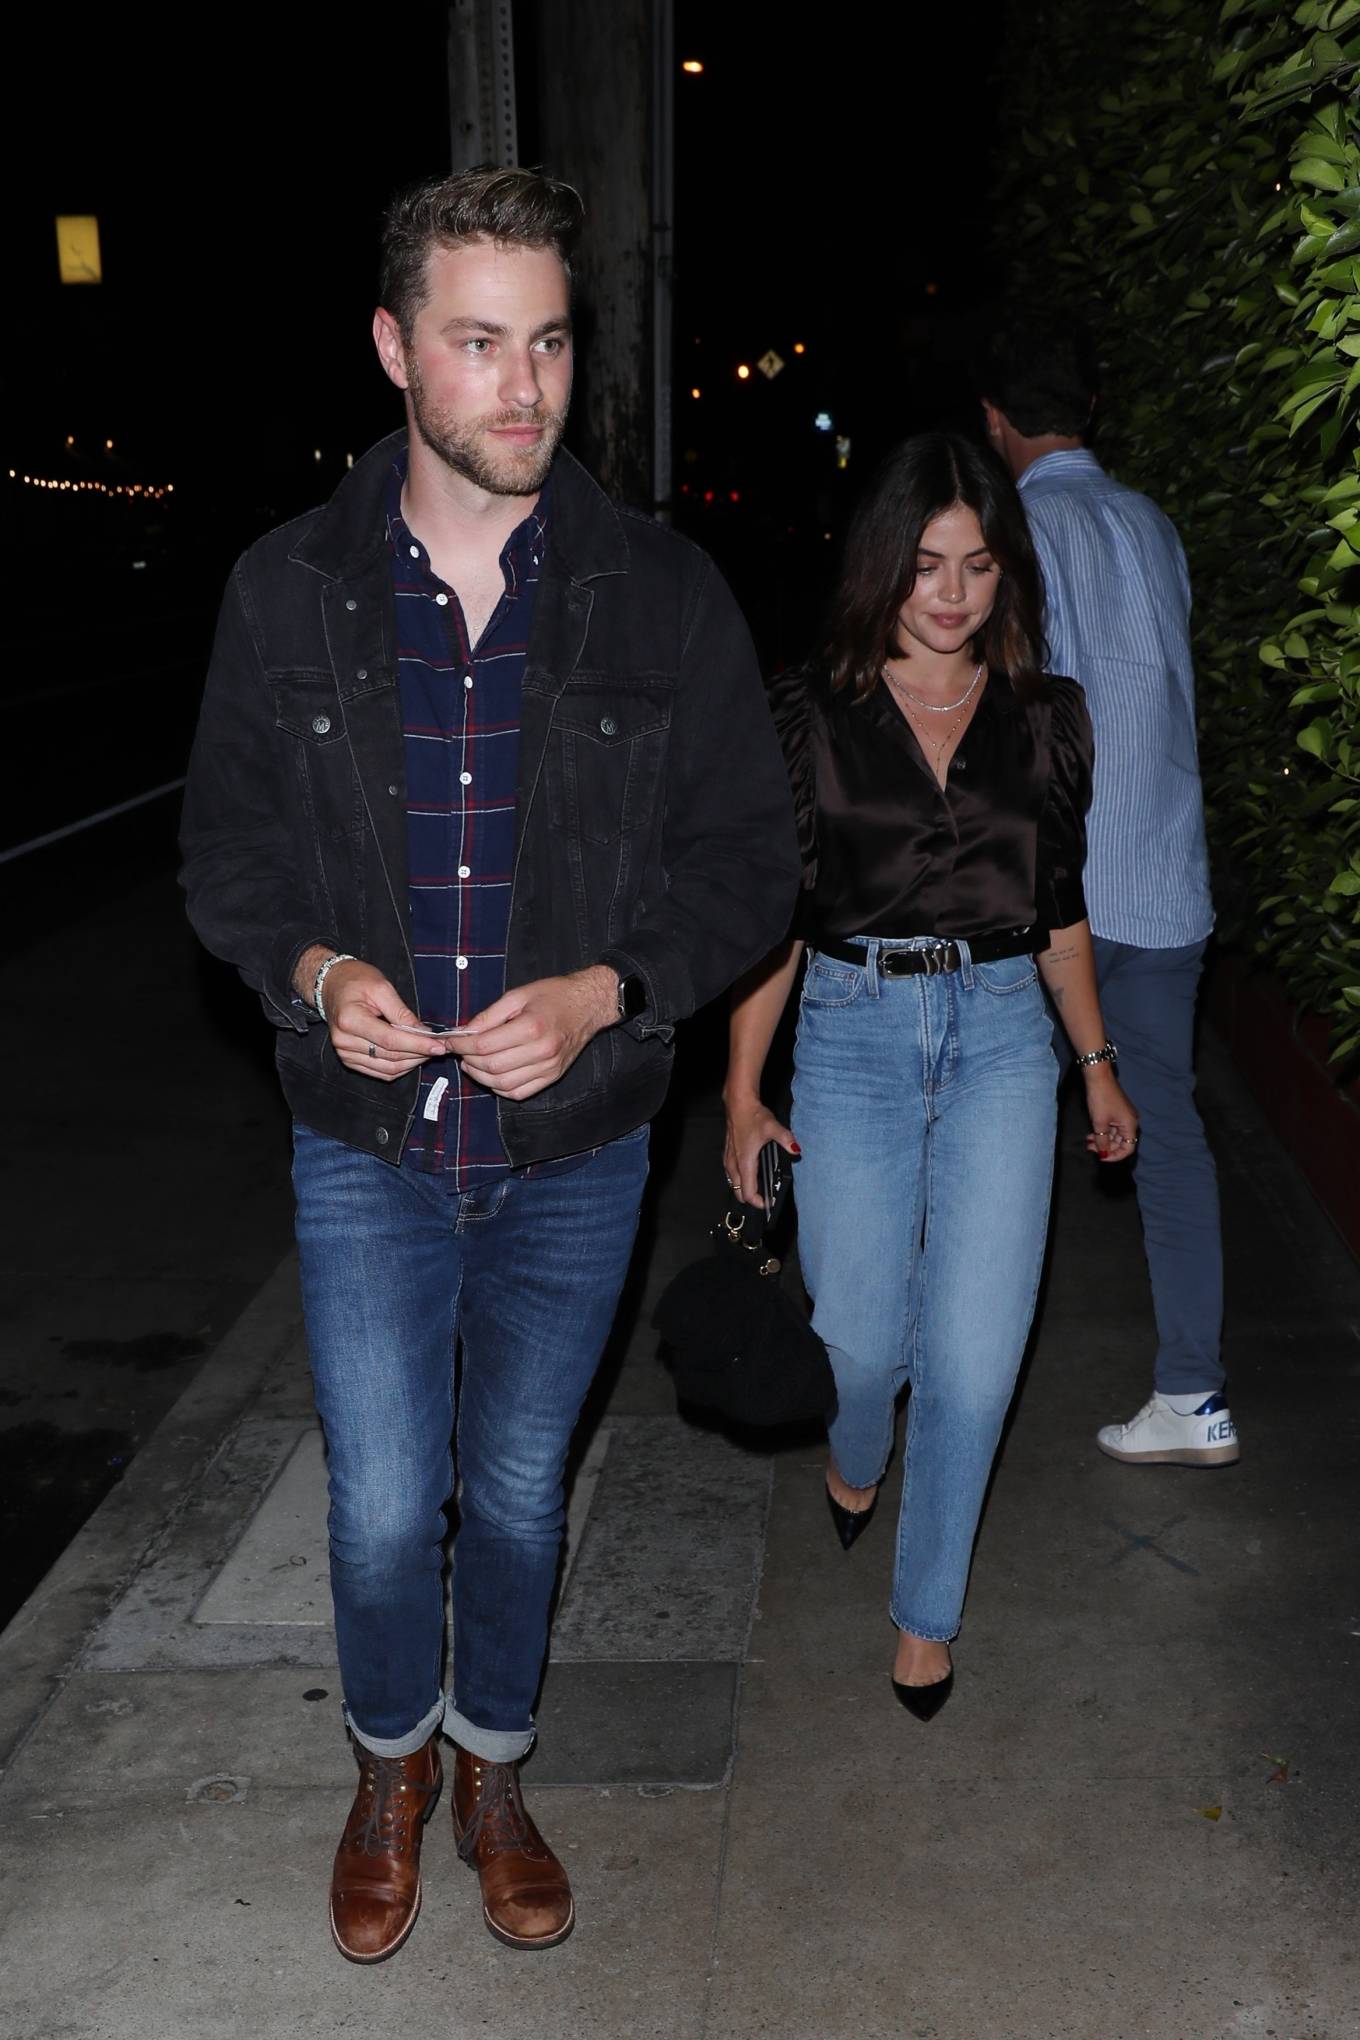 Lucy Hale - Seen with Cameron Fuller after a dinner date in Santa Monica